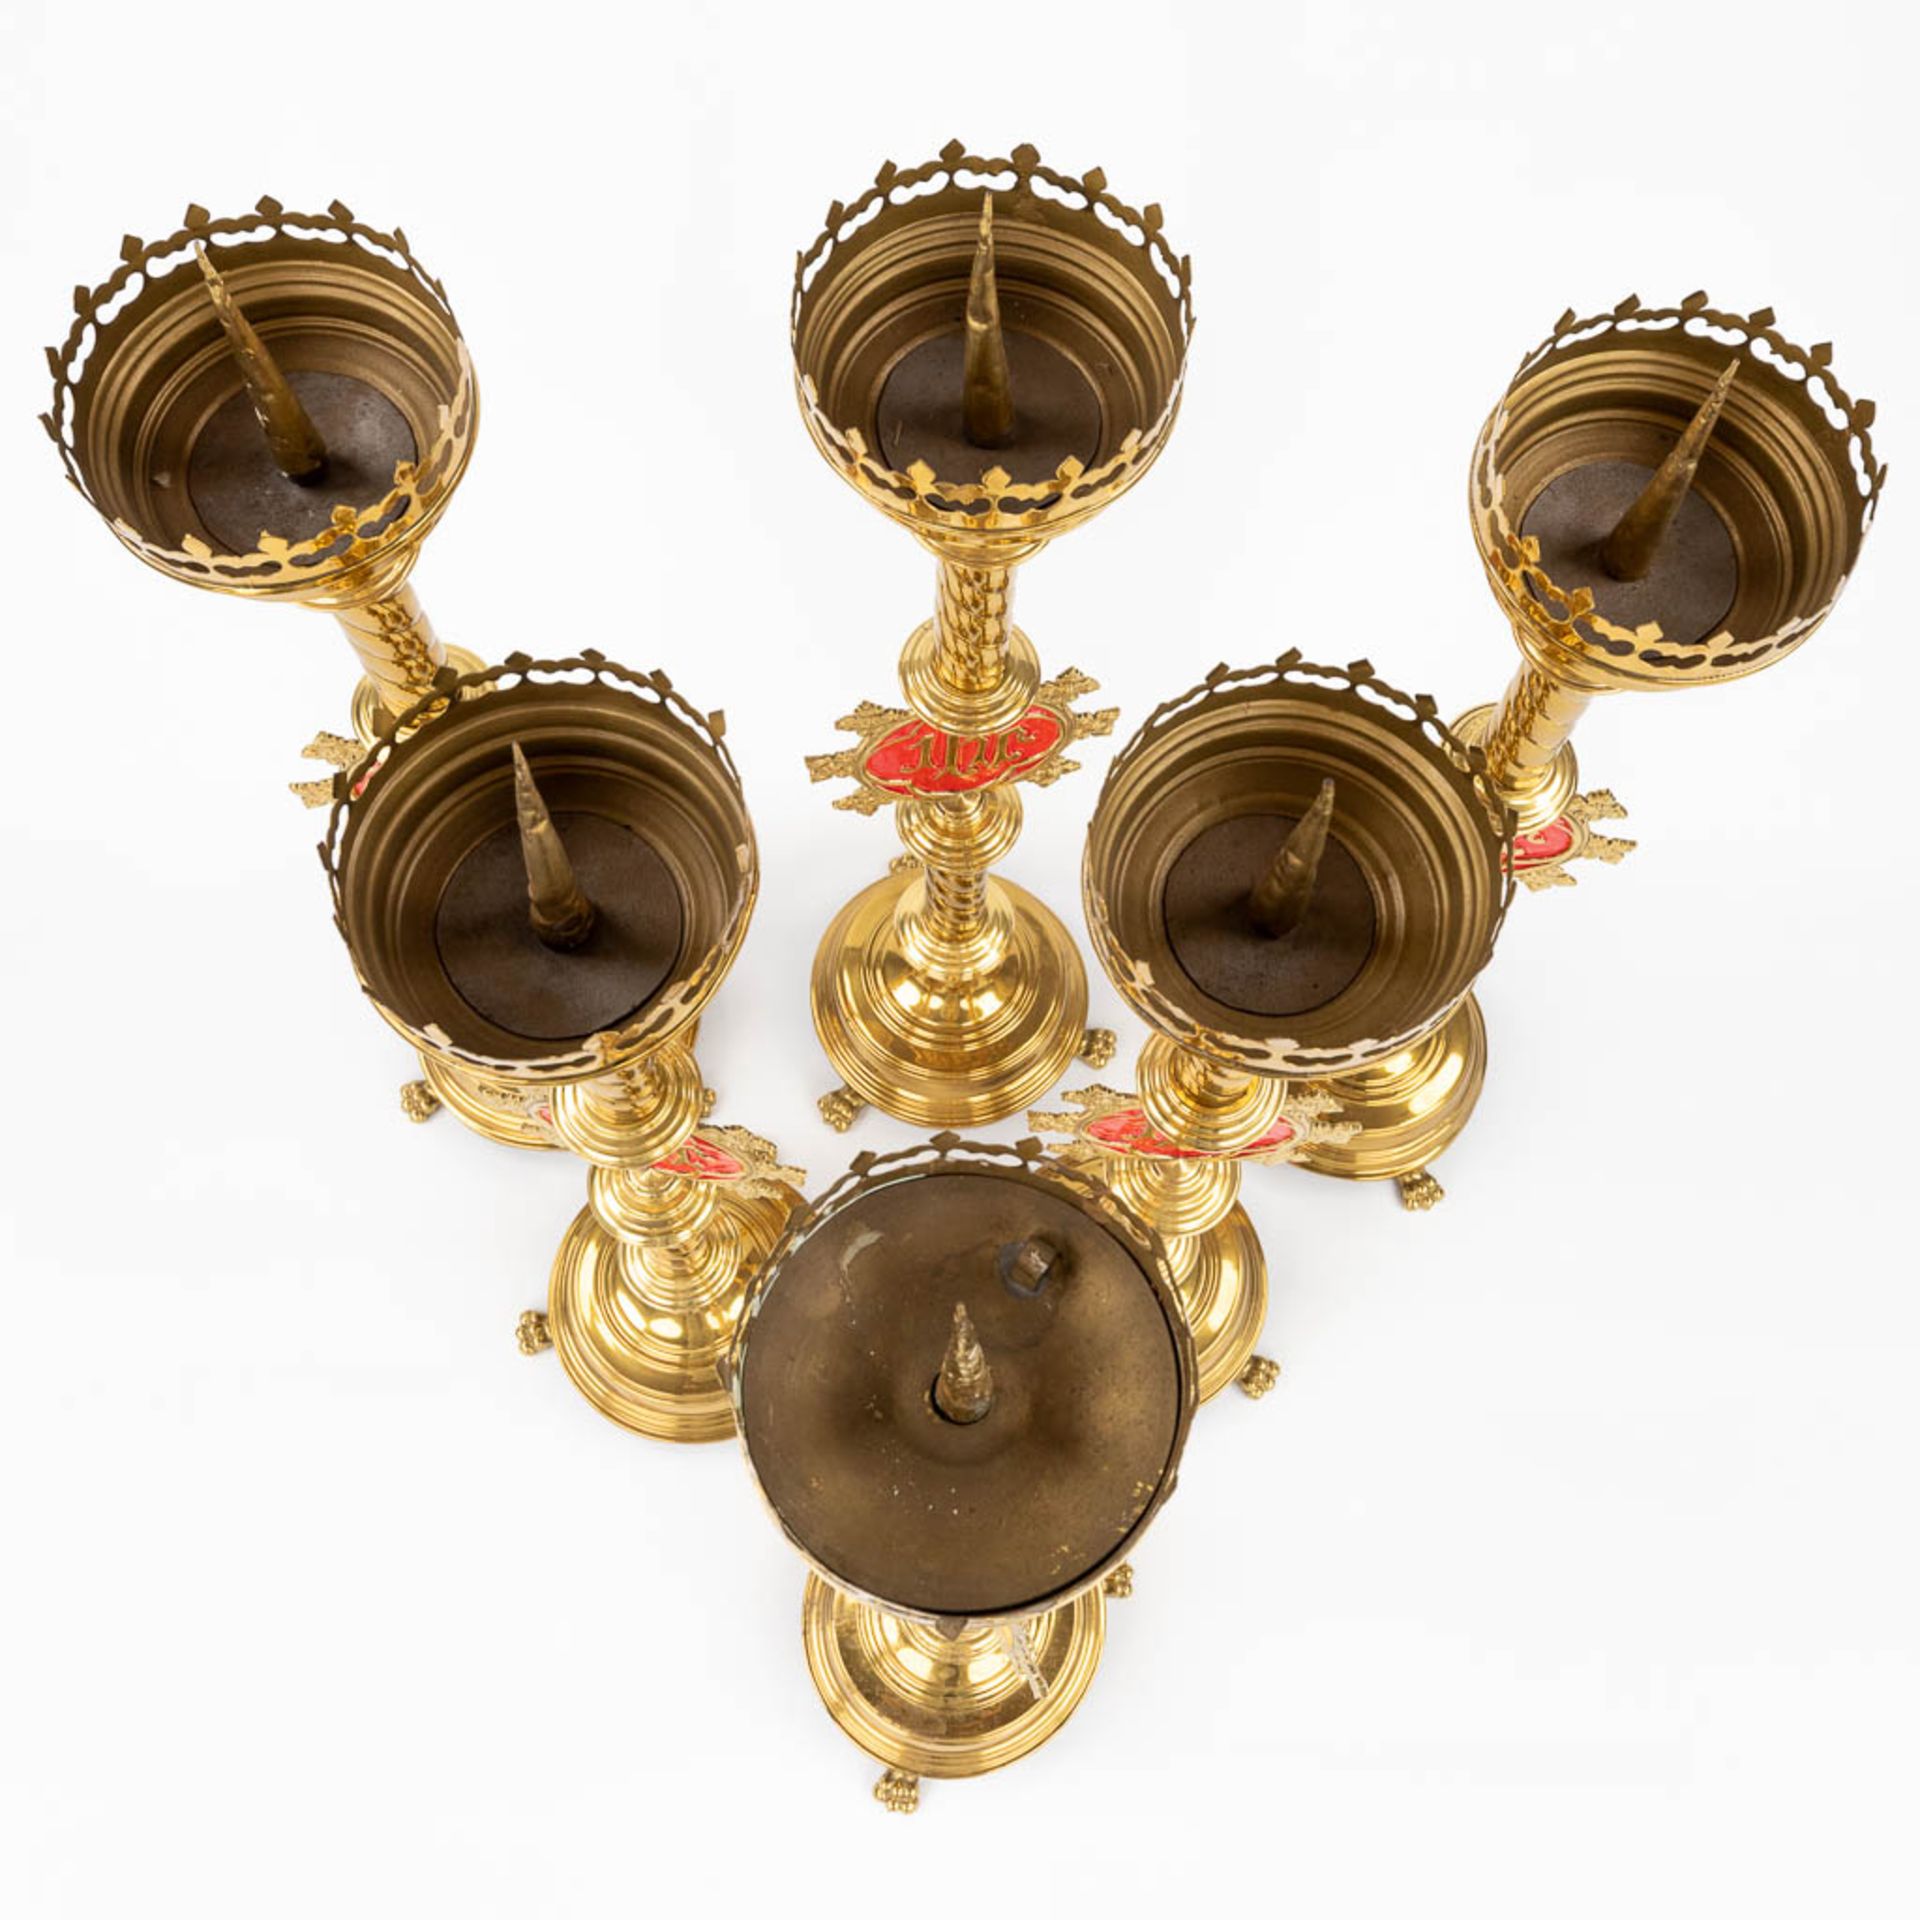 A set of 6 Church candlesticks with red IHS logo. (H:80 x D:20 cm) - Image 7 of 11